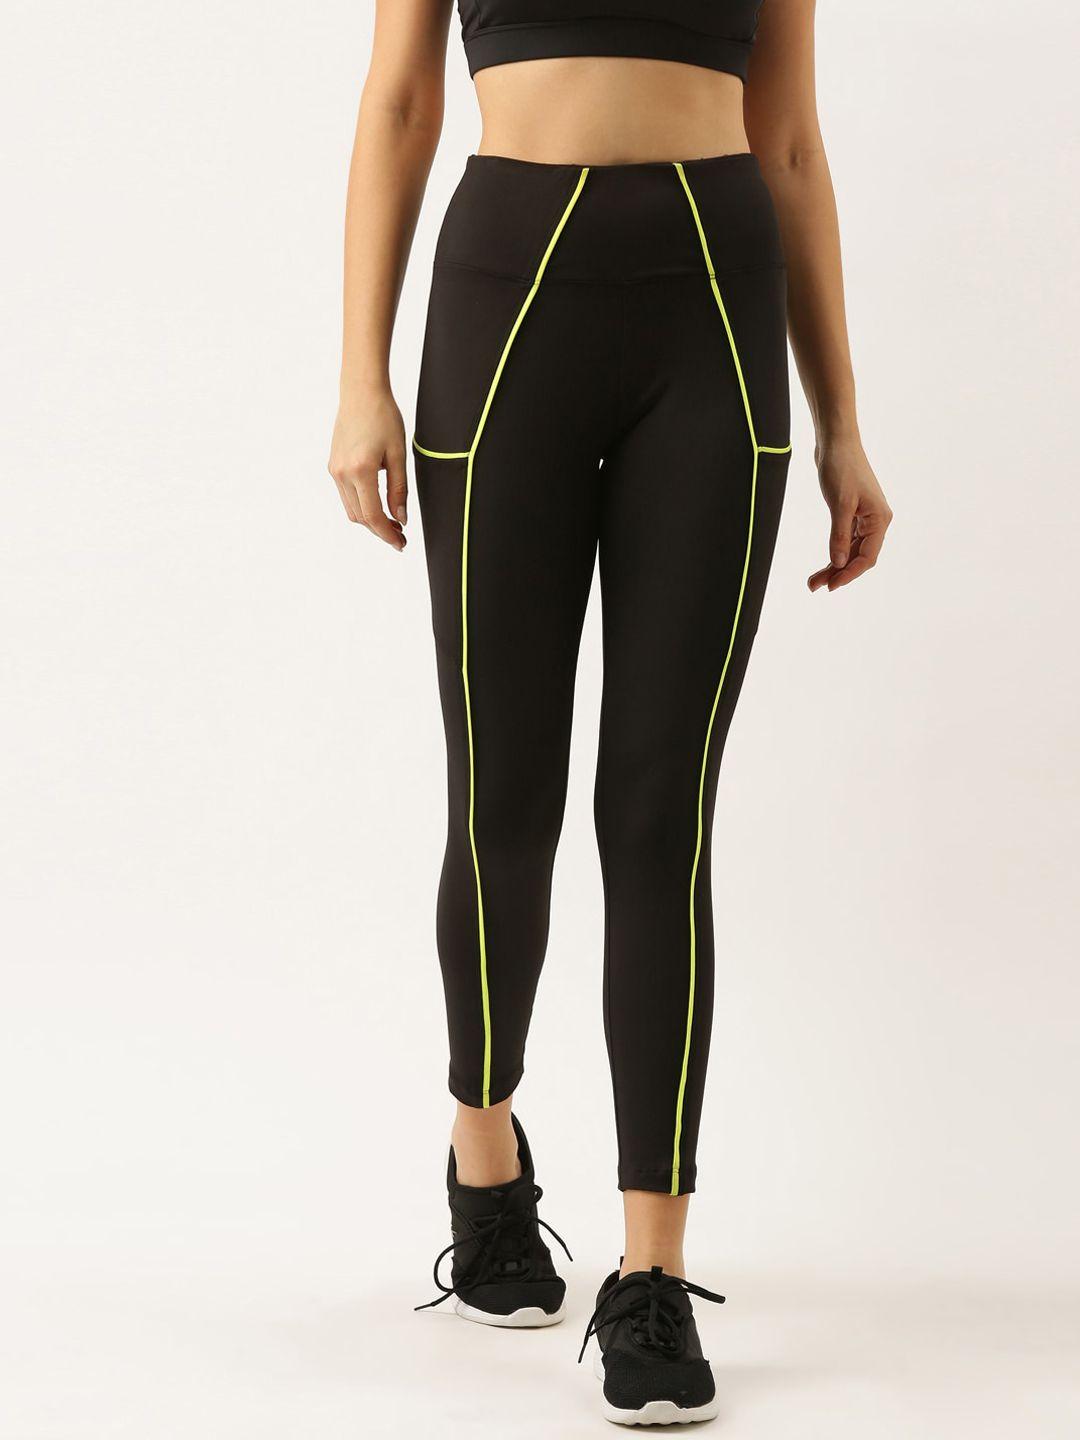 bannos swagger women black solid ankle-length neon green piping tights